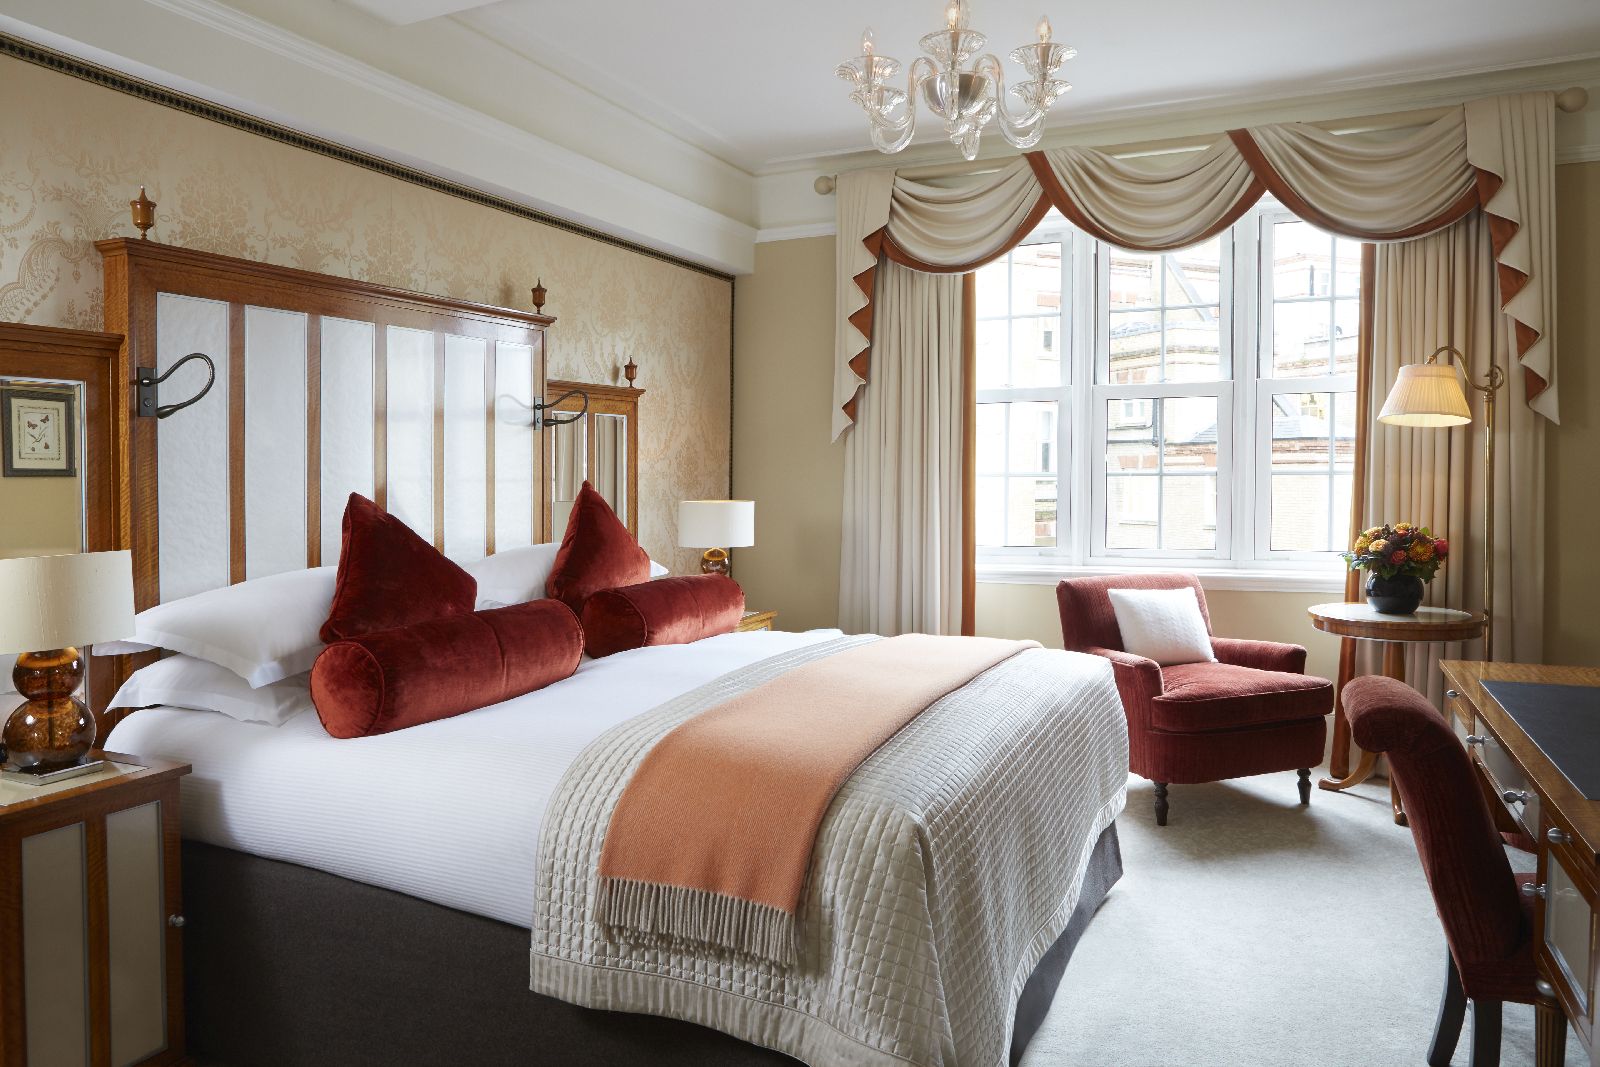 A superior room at The Goring hotel in London England